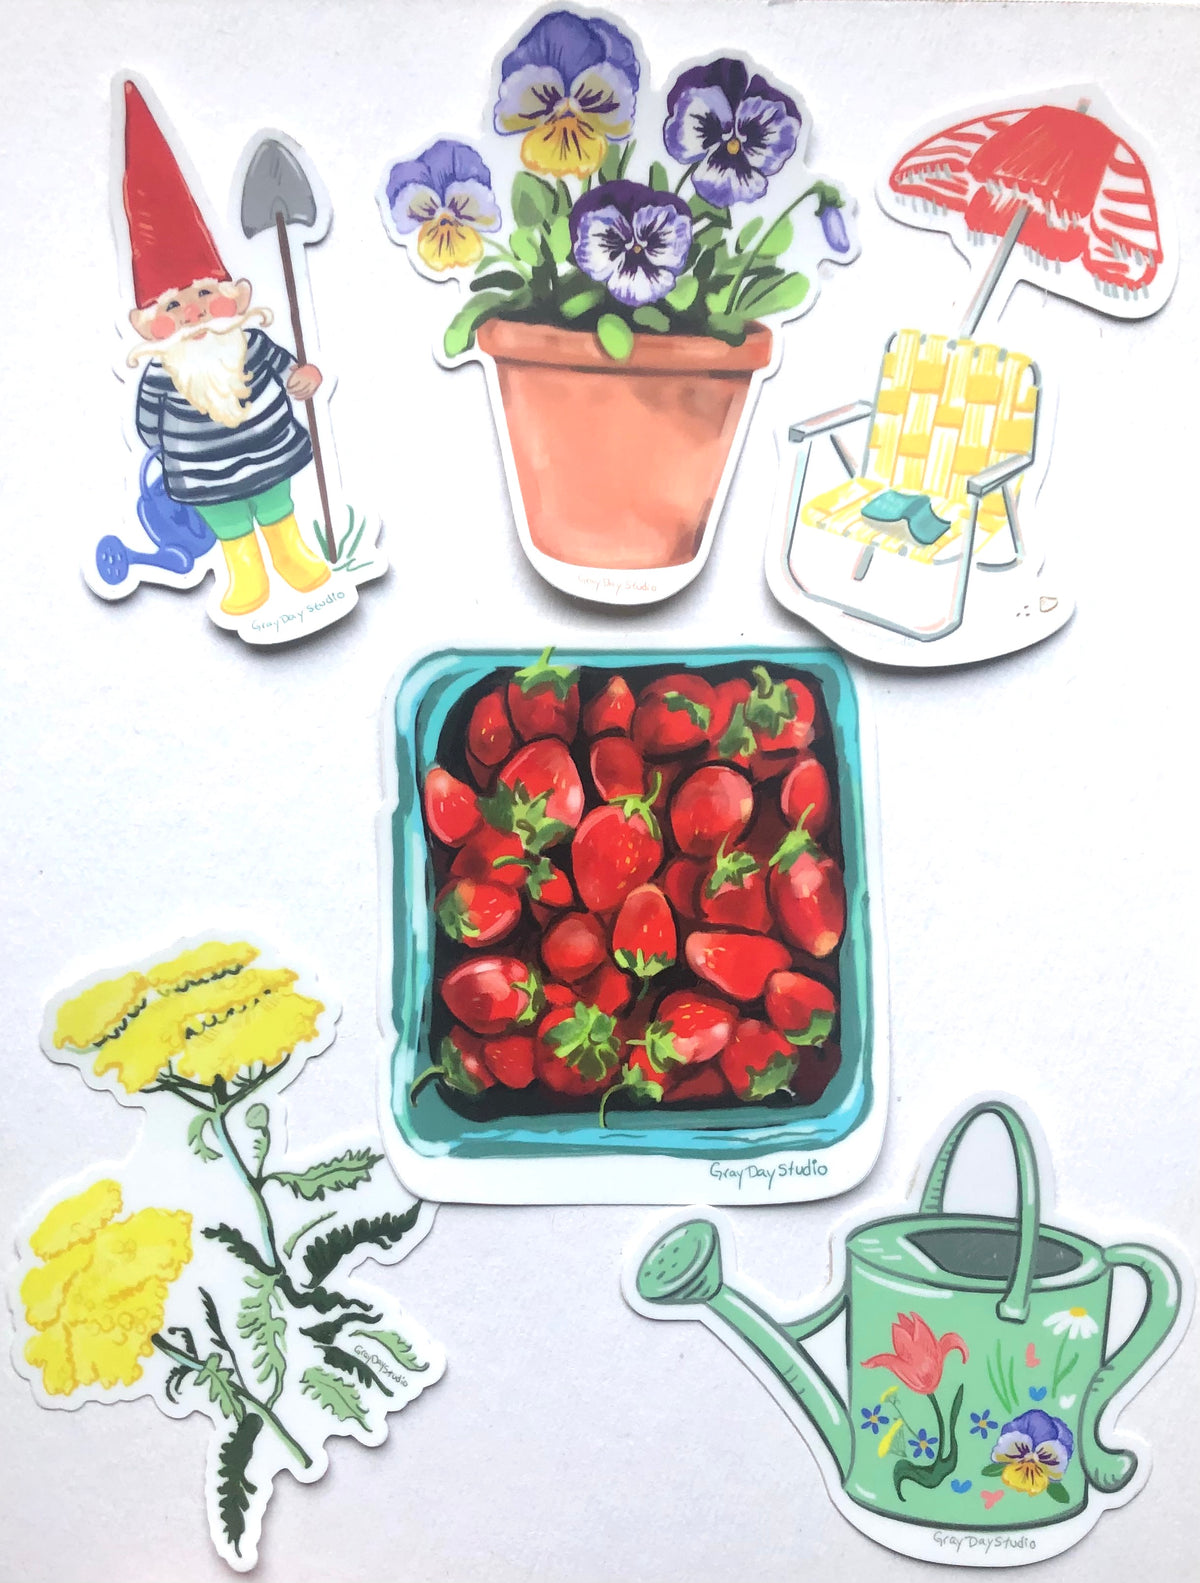 gardening stickers, garden gnome and flowers by Maine artist and illustrator Abigail Gray Swartz